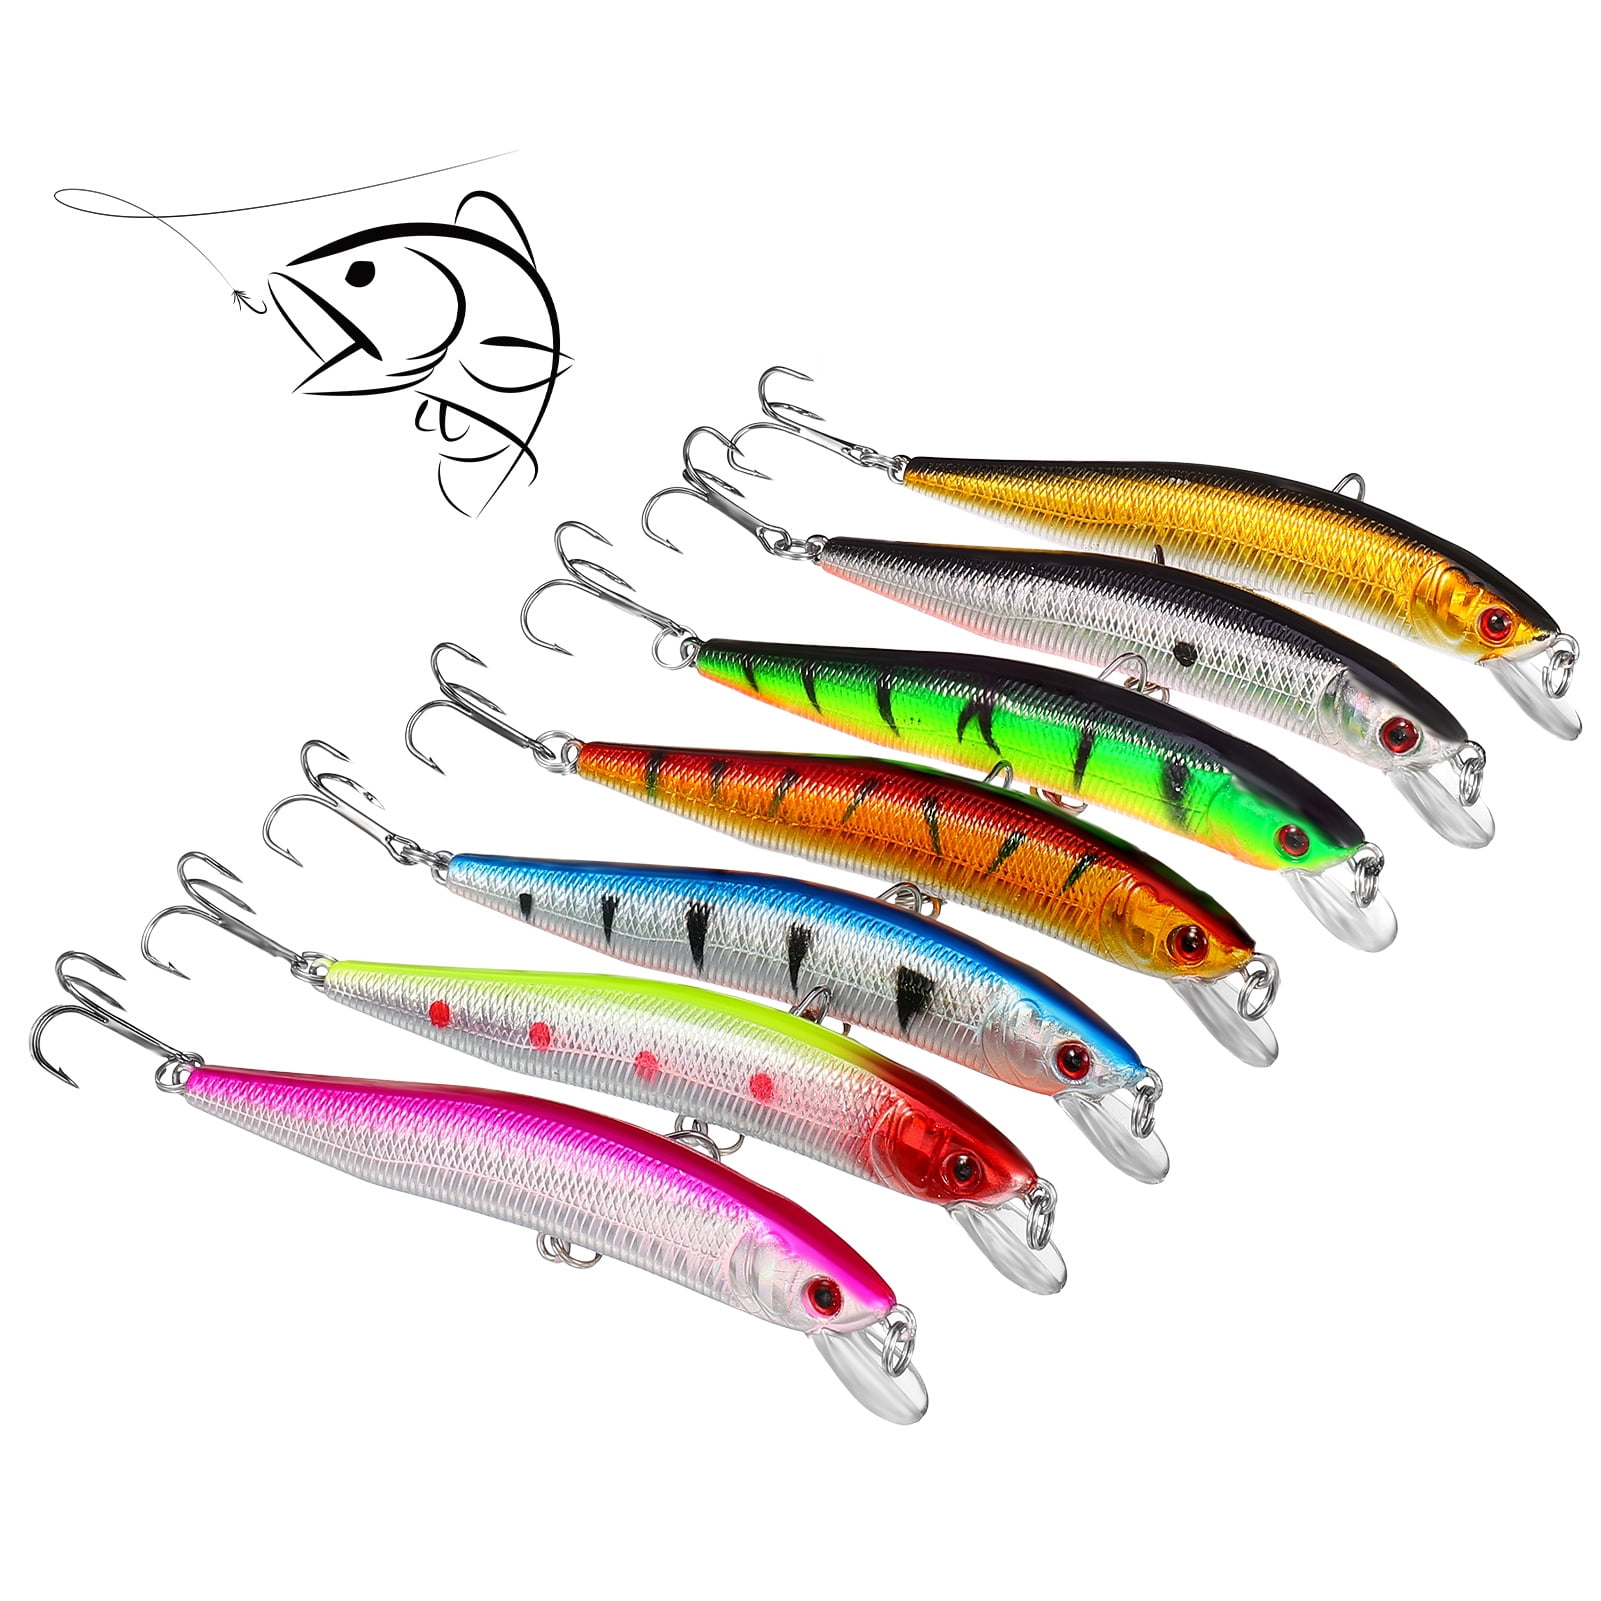 Fishing Lure Minnow Bait Catfish for Fishing YunZyun Fishing Hard Lure Minnow Artificial Bait 3D Eyes Wobblers Crankbait Plastic Bait Fish Pesca Isca Bass Trout Pike Lure 